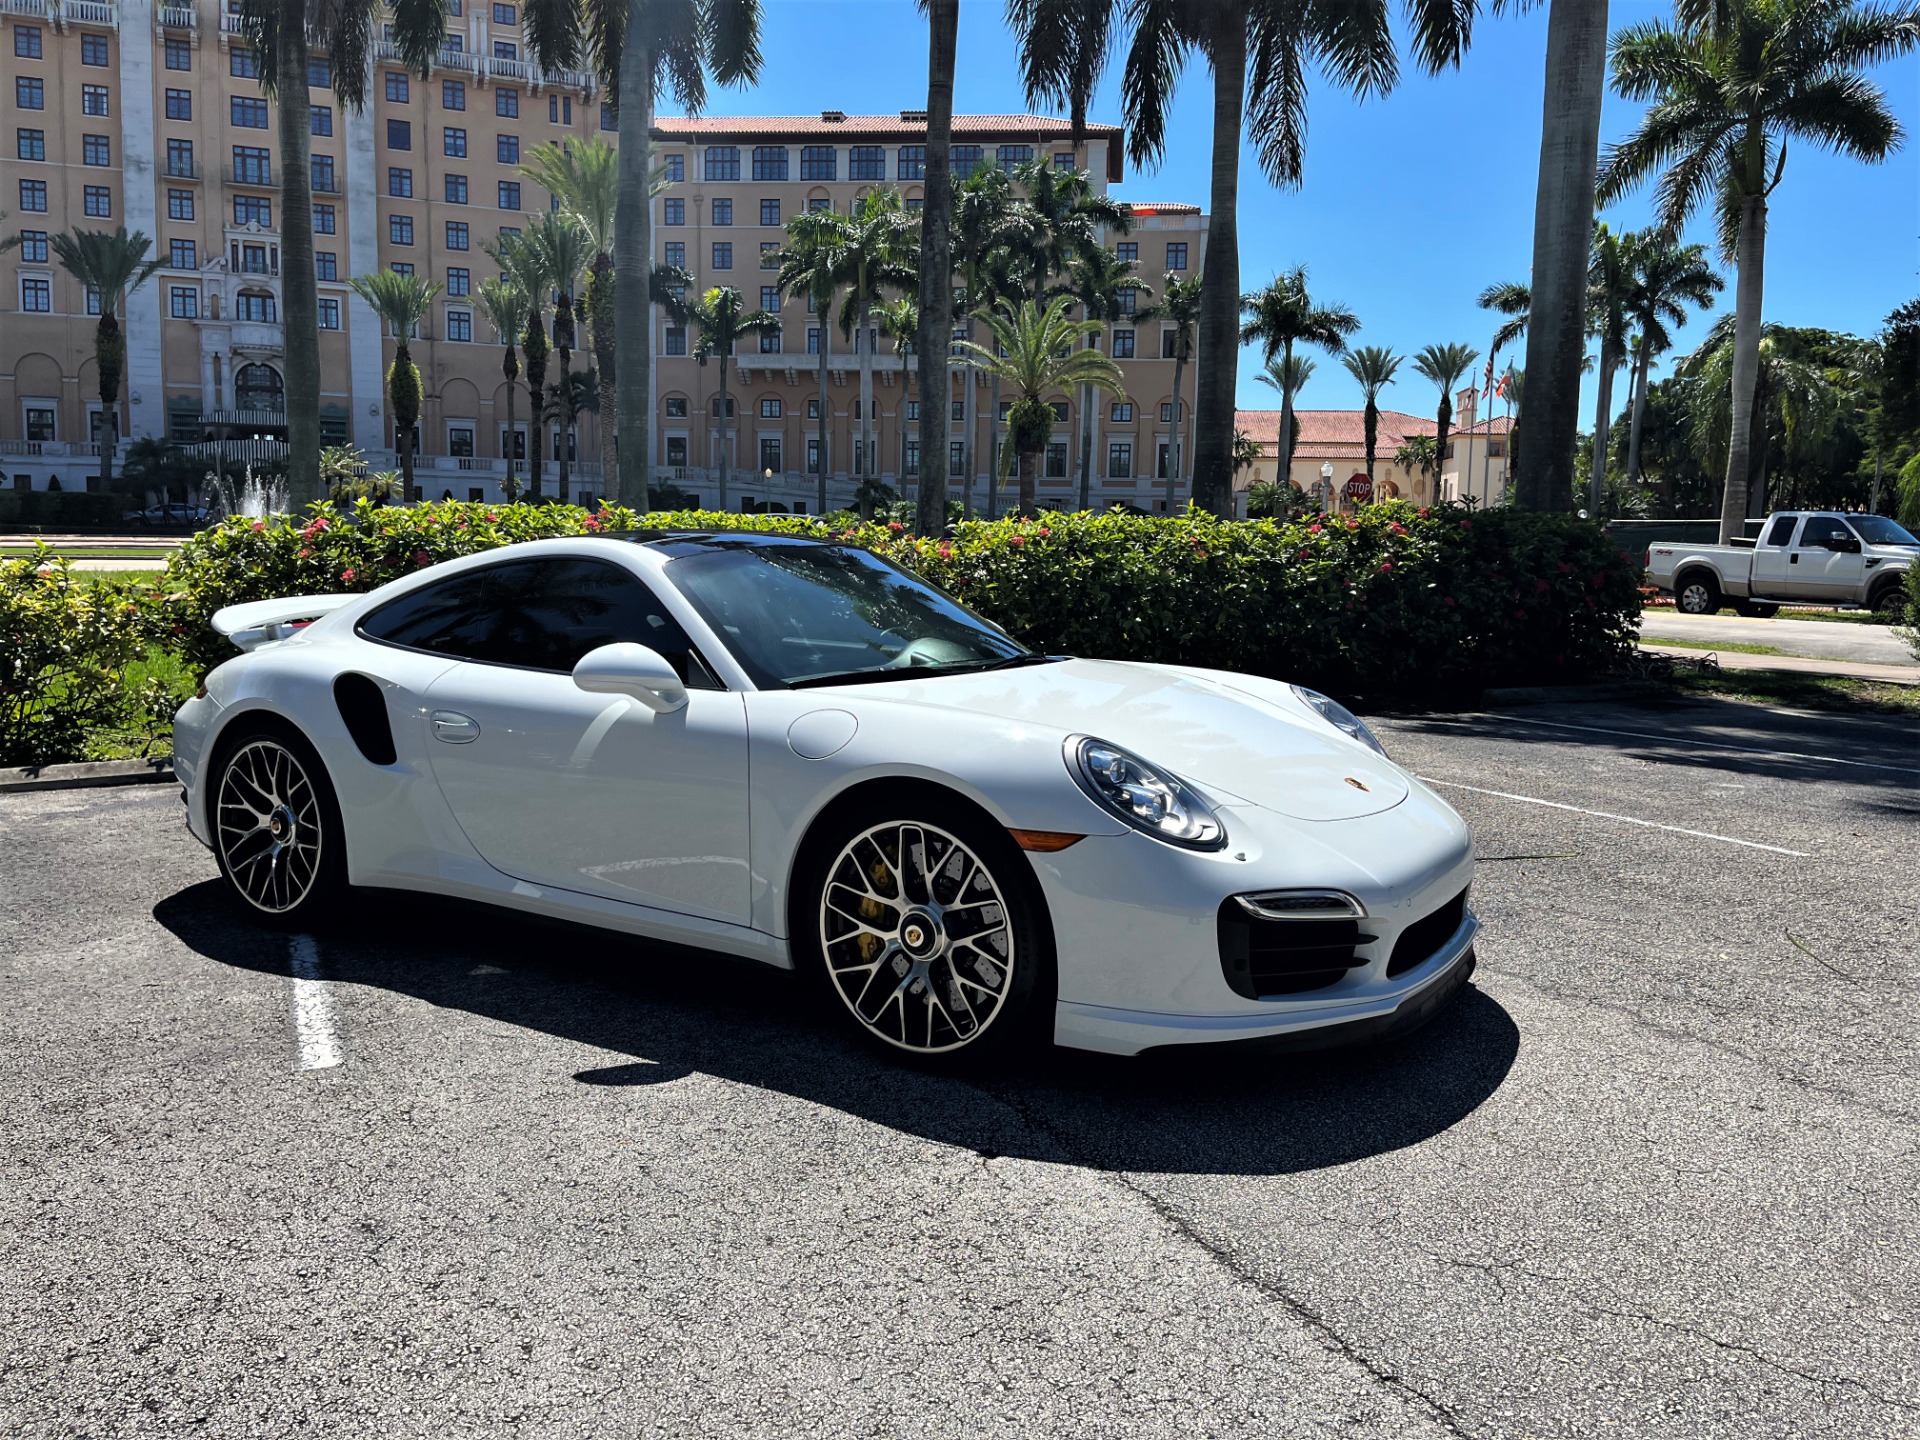 Used 2014 Porsche 911 Turbo S for sale $125,850 at The Gables Sports Cars in Miami FL 33146 2